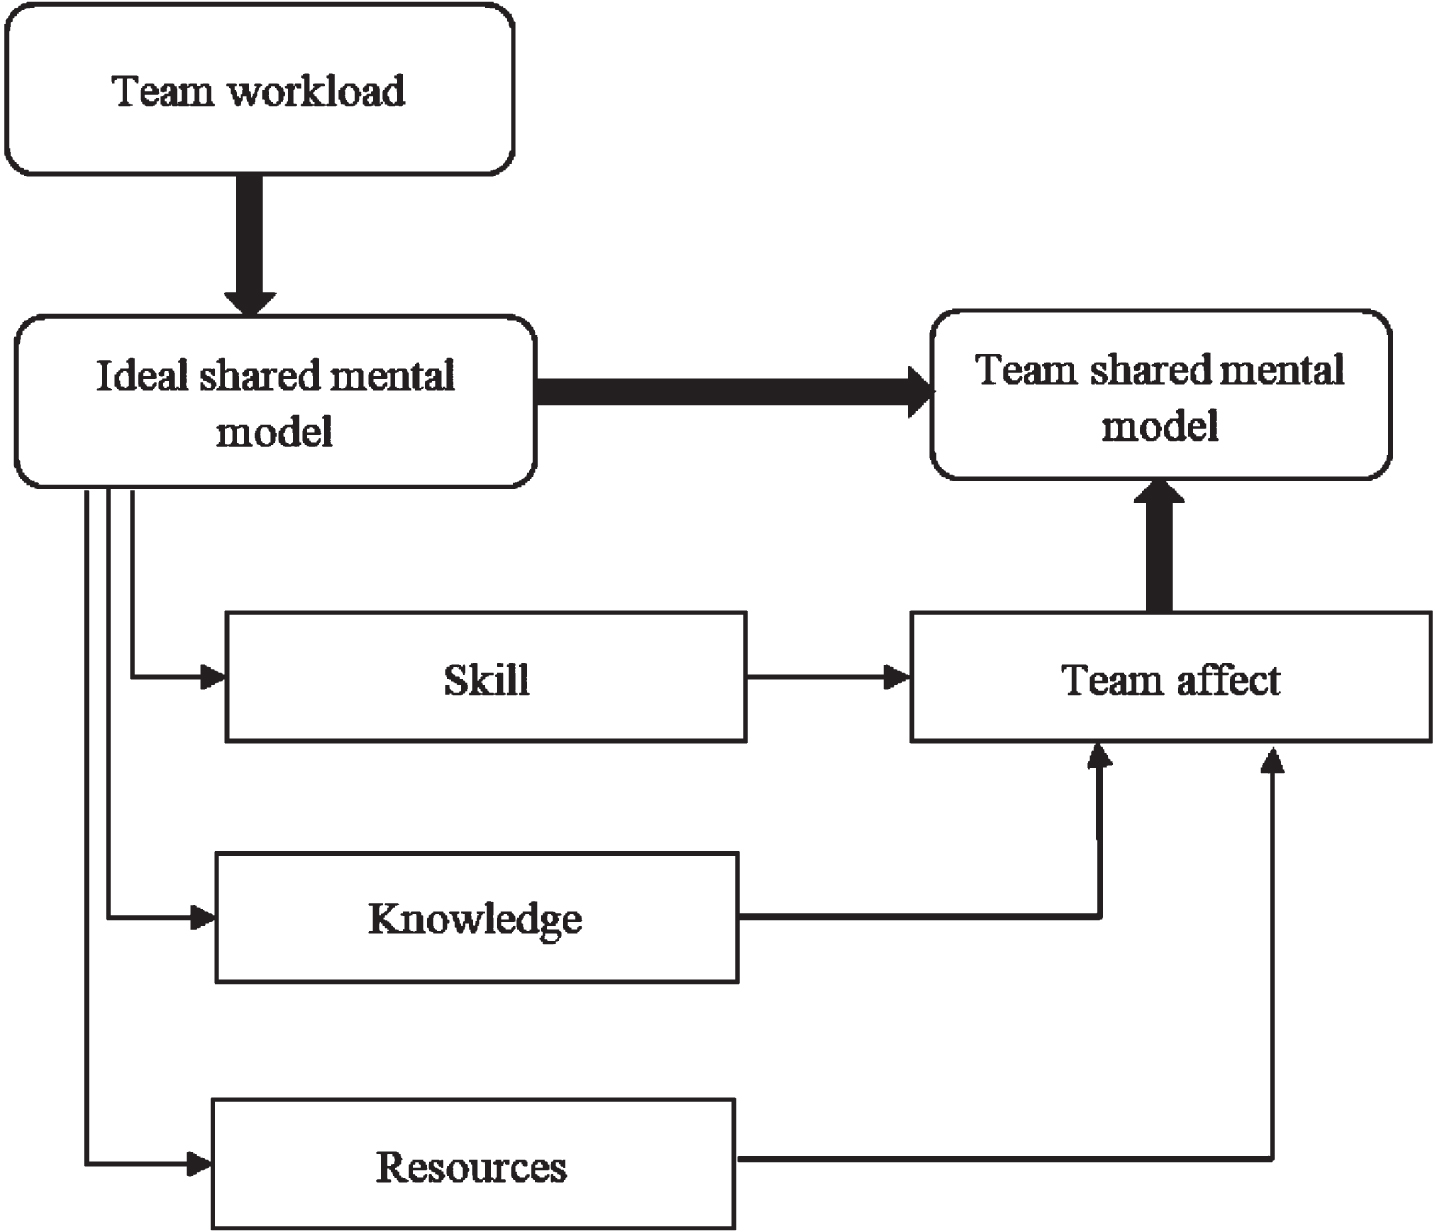 Team affect and shared mental model building through TASKS (Task, Affect, Skills, Knowledge, and Stress) analysis to identify required knowledge, skill, and resources in an ideal shared mental model. Adapted from Yang, J., Yang, L., Quan,H., & Zeng, Y. (2021). Implementation Barriers: A TASKS Framework. Journal of Integrated Design and Process Science, Preprint, 1-14.